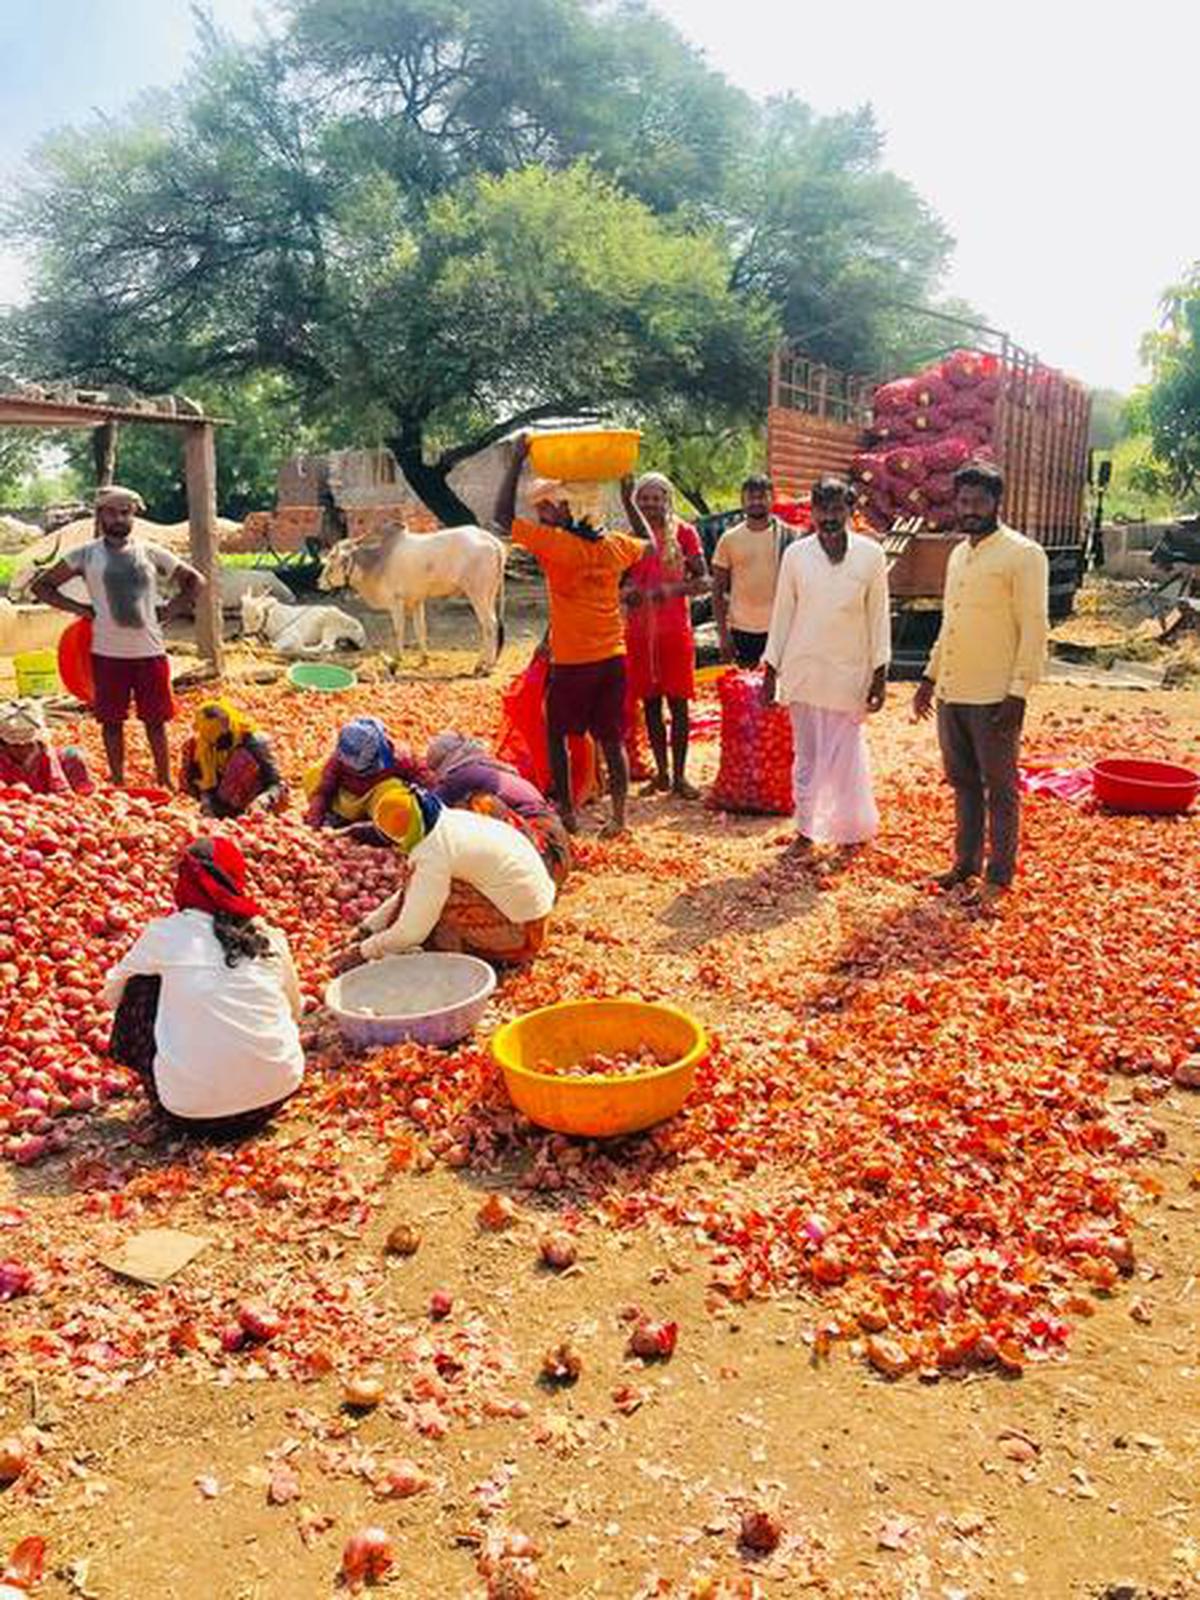 Meet India’s inspiring farmers who pivot, adapt and keep supplying fresh produce during the lockdowns